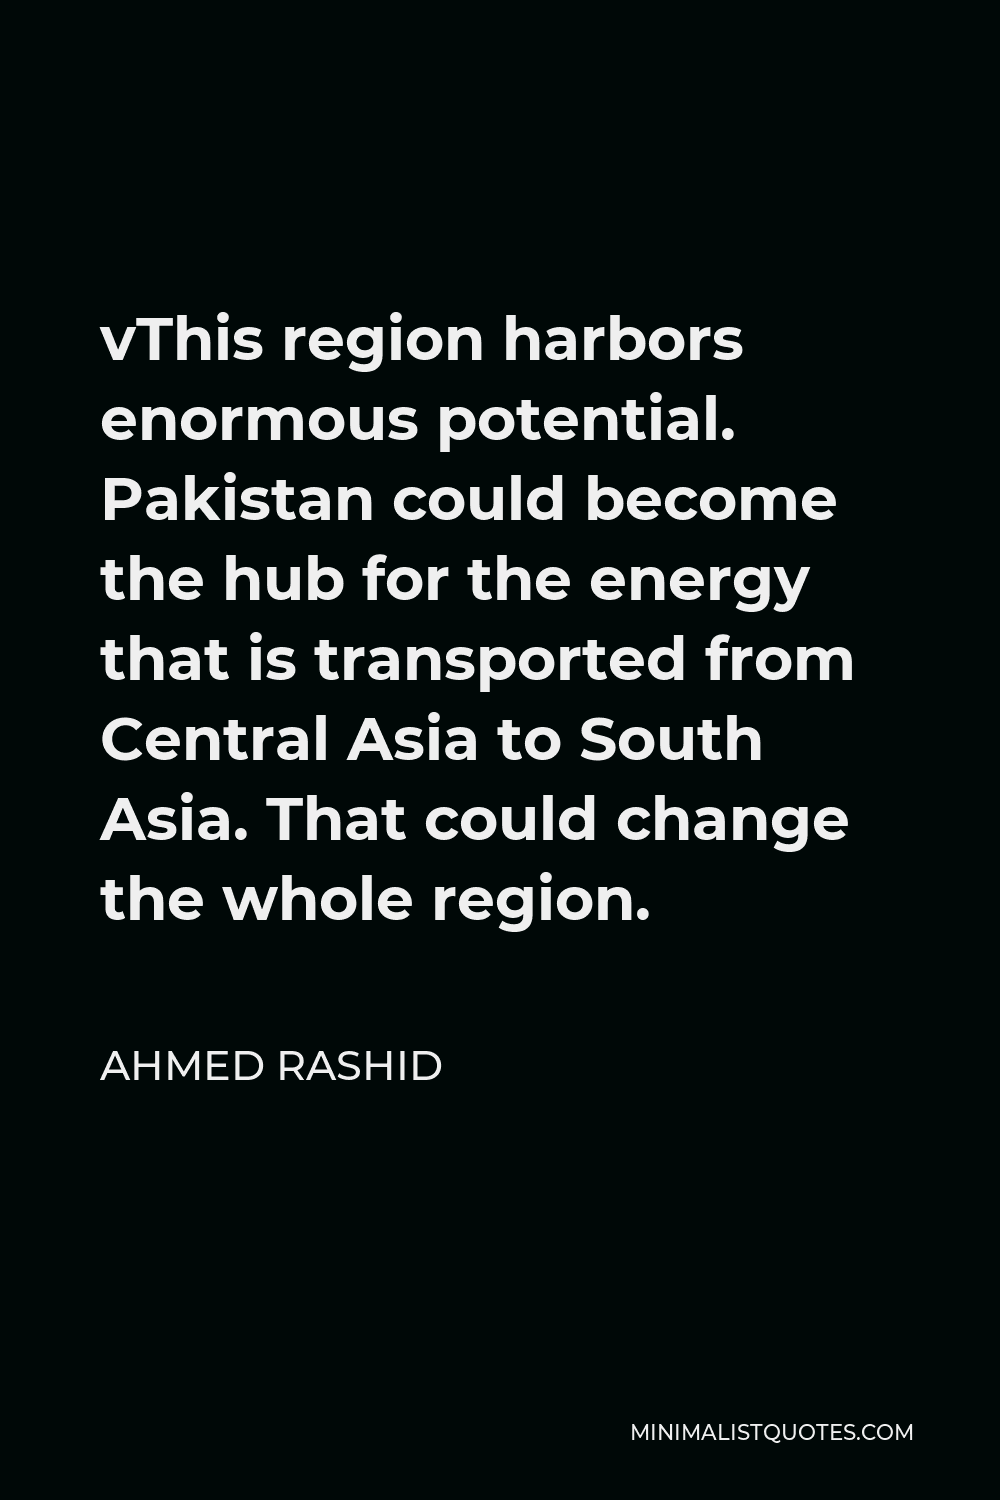 Ahmed Rashid Quote - vThis region harbors enormous potential. Pakistan could become the hub for the energy that is transported from Central Asia to South Asia. That could change the whole region.